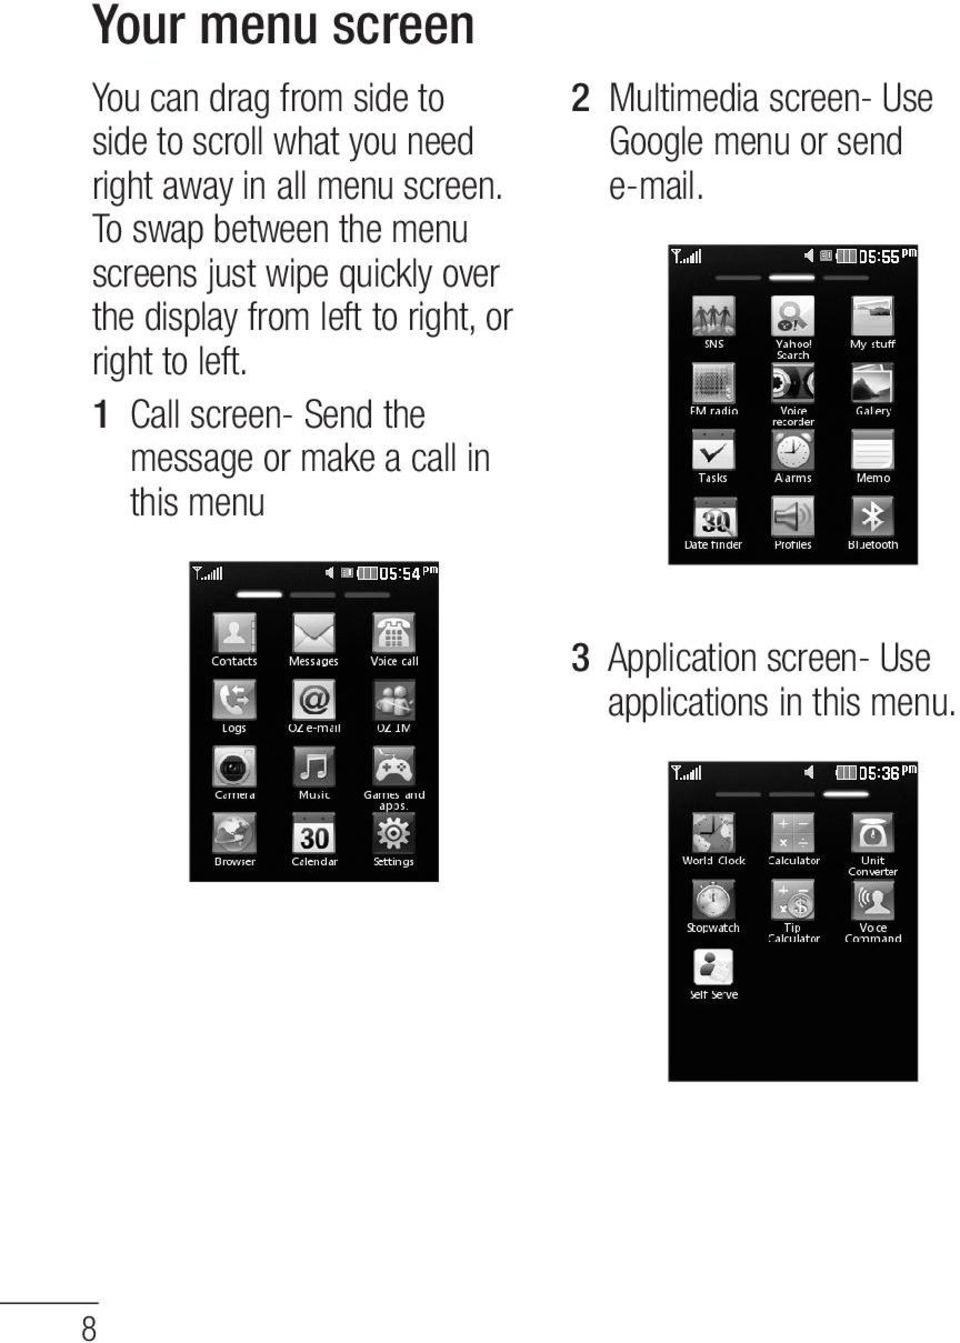 To swap between the menu screens just wipe quickly over the display from left to right, or